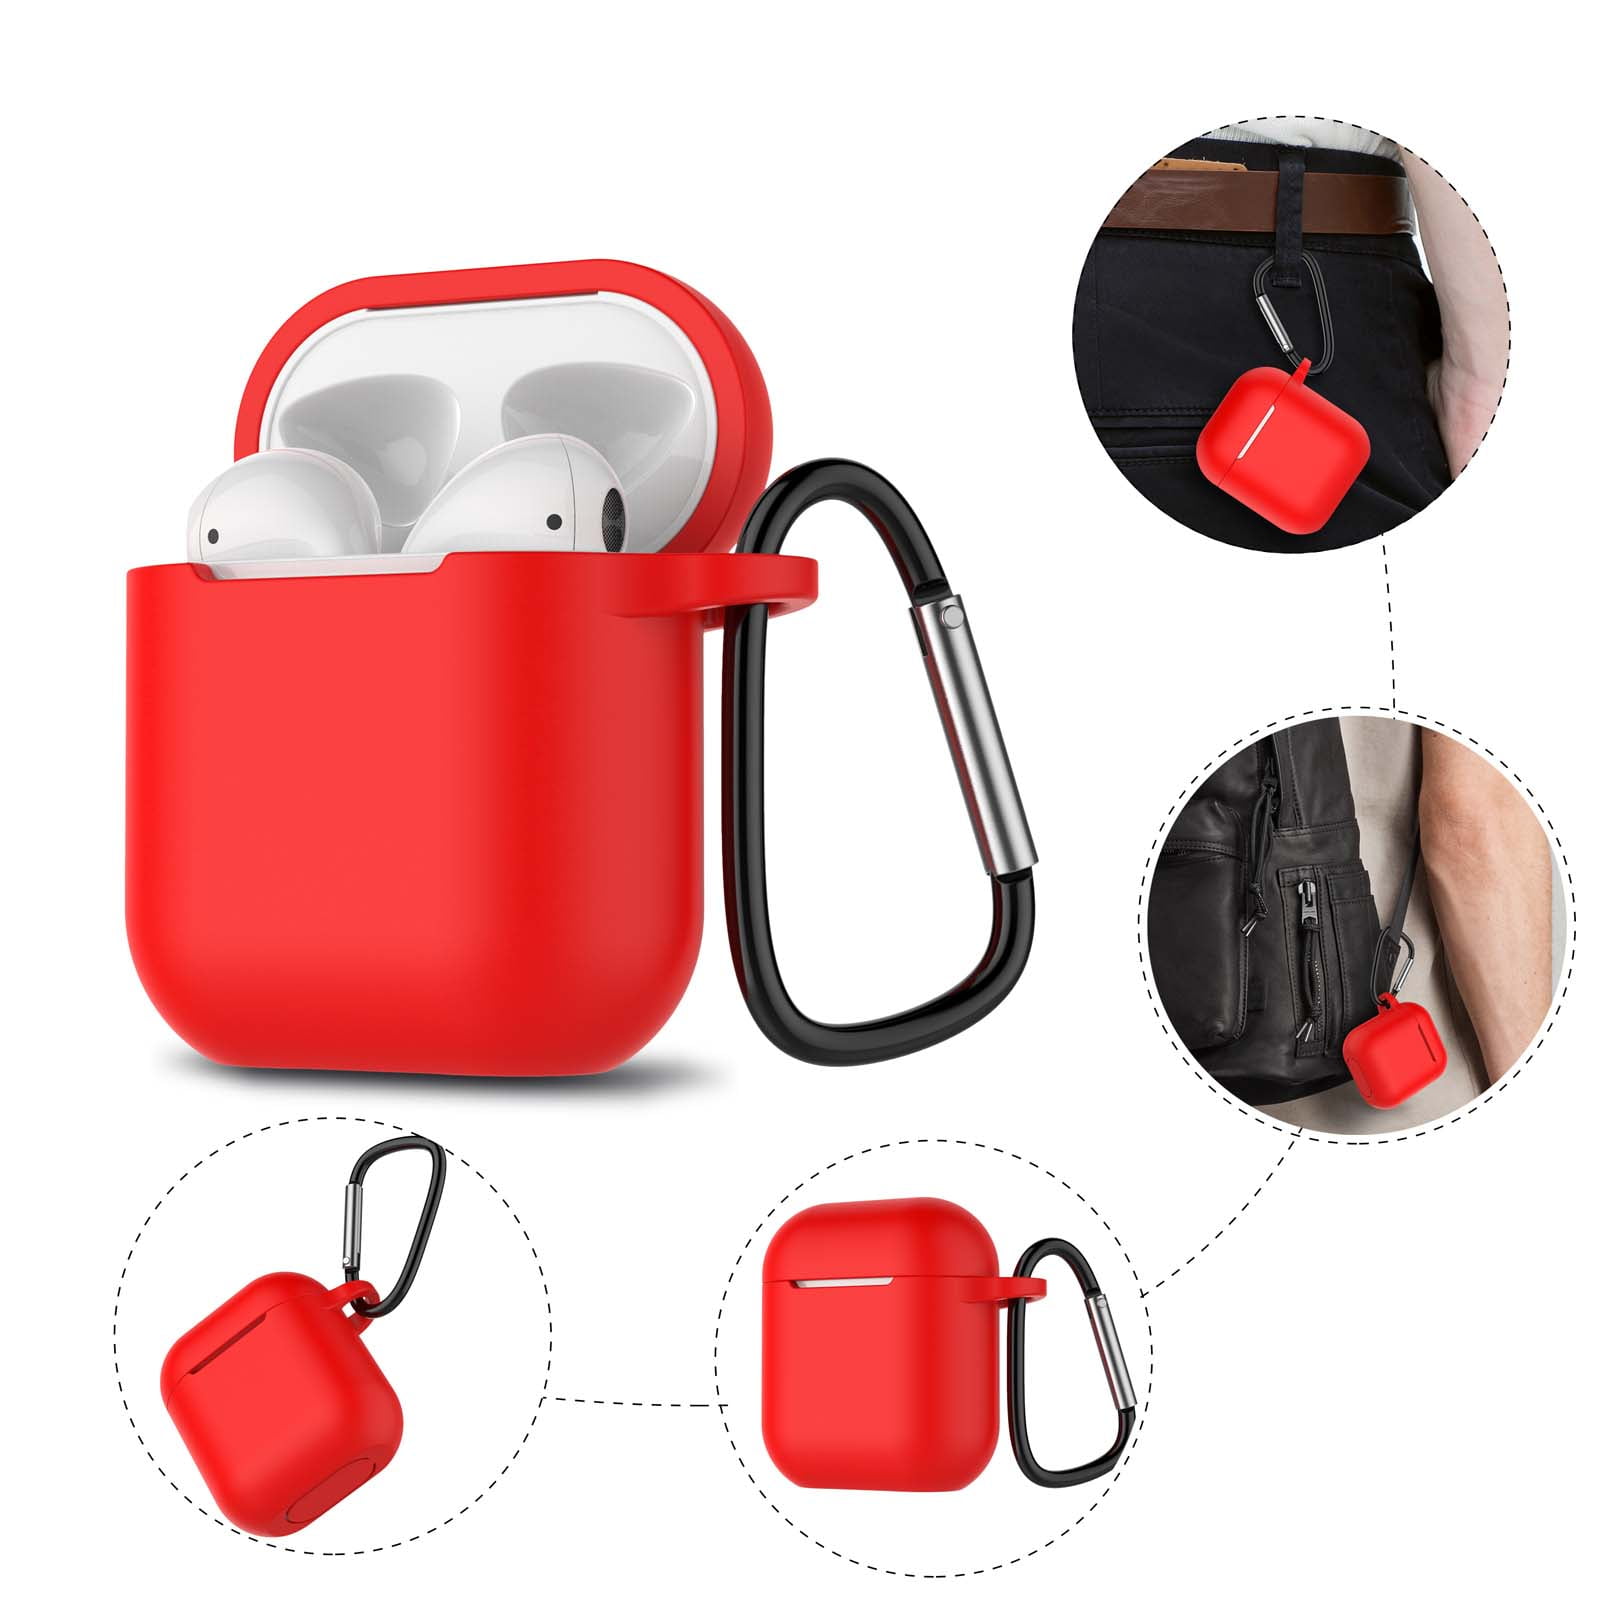 YRD TECH for Apple AirPods Earphones Leather Cover Skin Case with Carabiner Protective